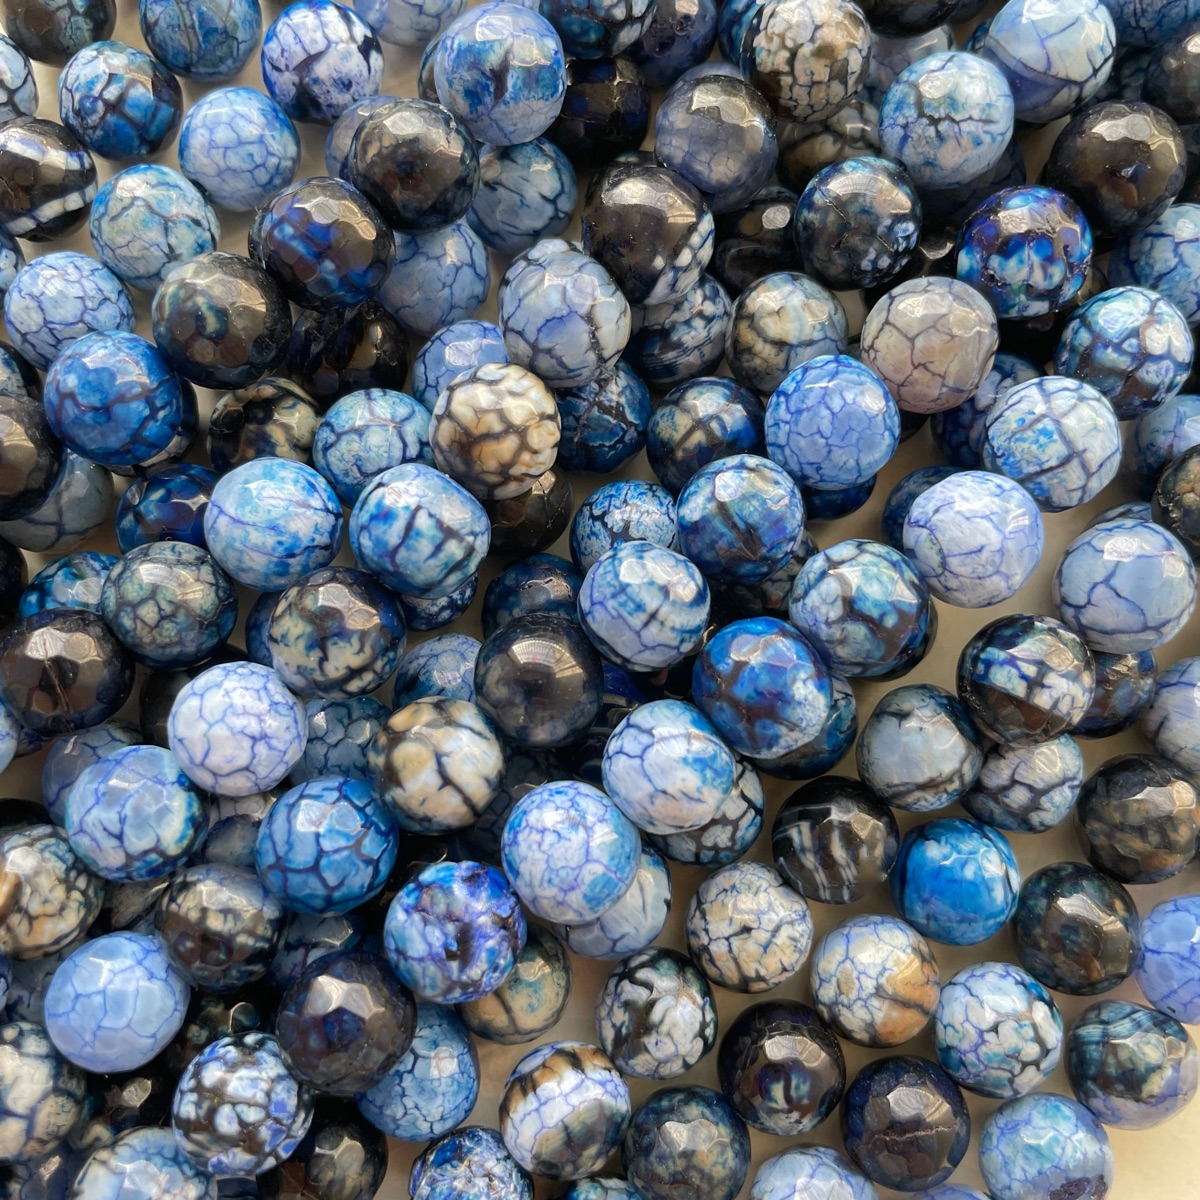 2 Strands/lot 10mm Colorful Cracked Fire Agate Faceted Stone Beads Blue Stone Beads Faceted Agate Beads New Beads Arrivals Charms Beads Beyond